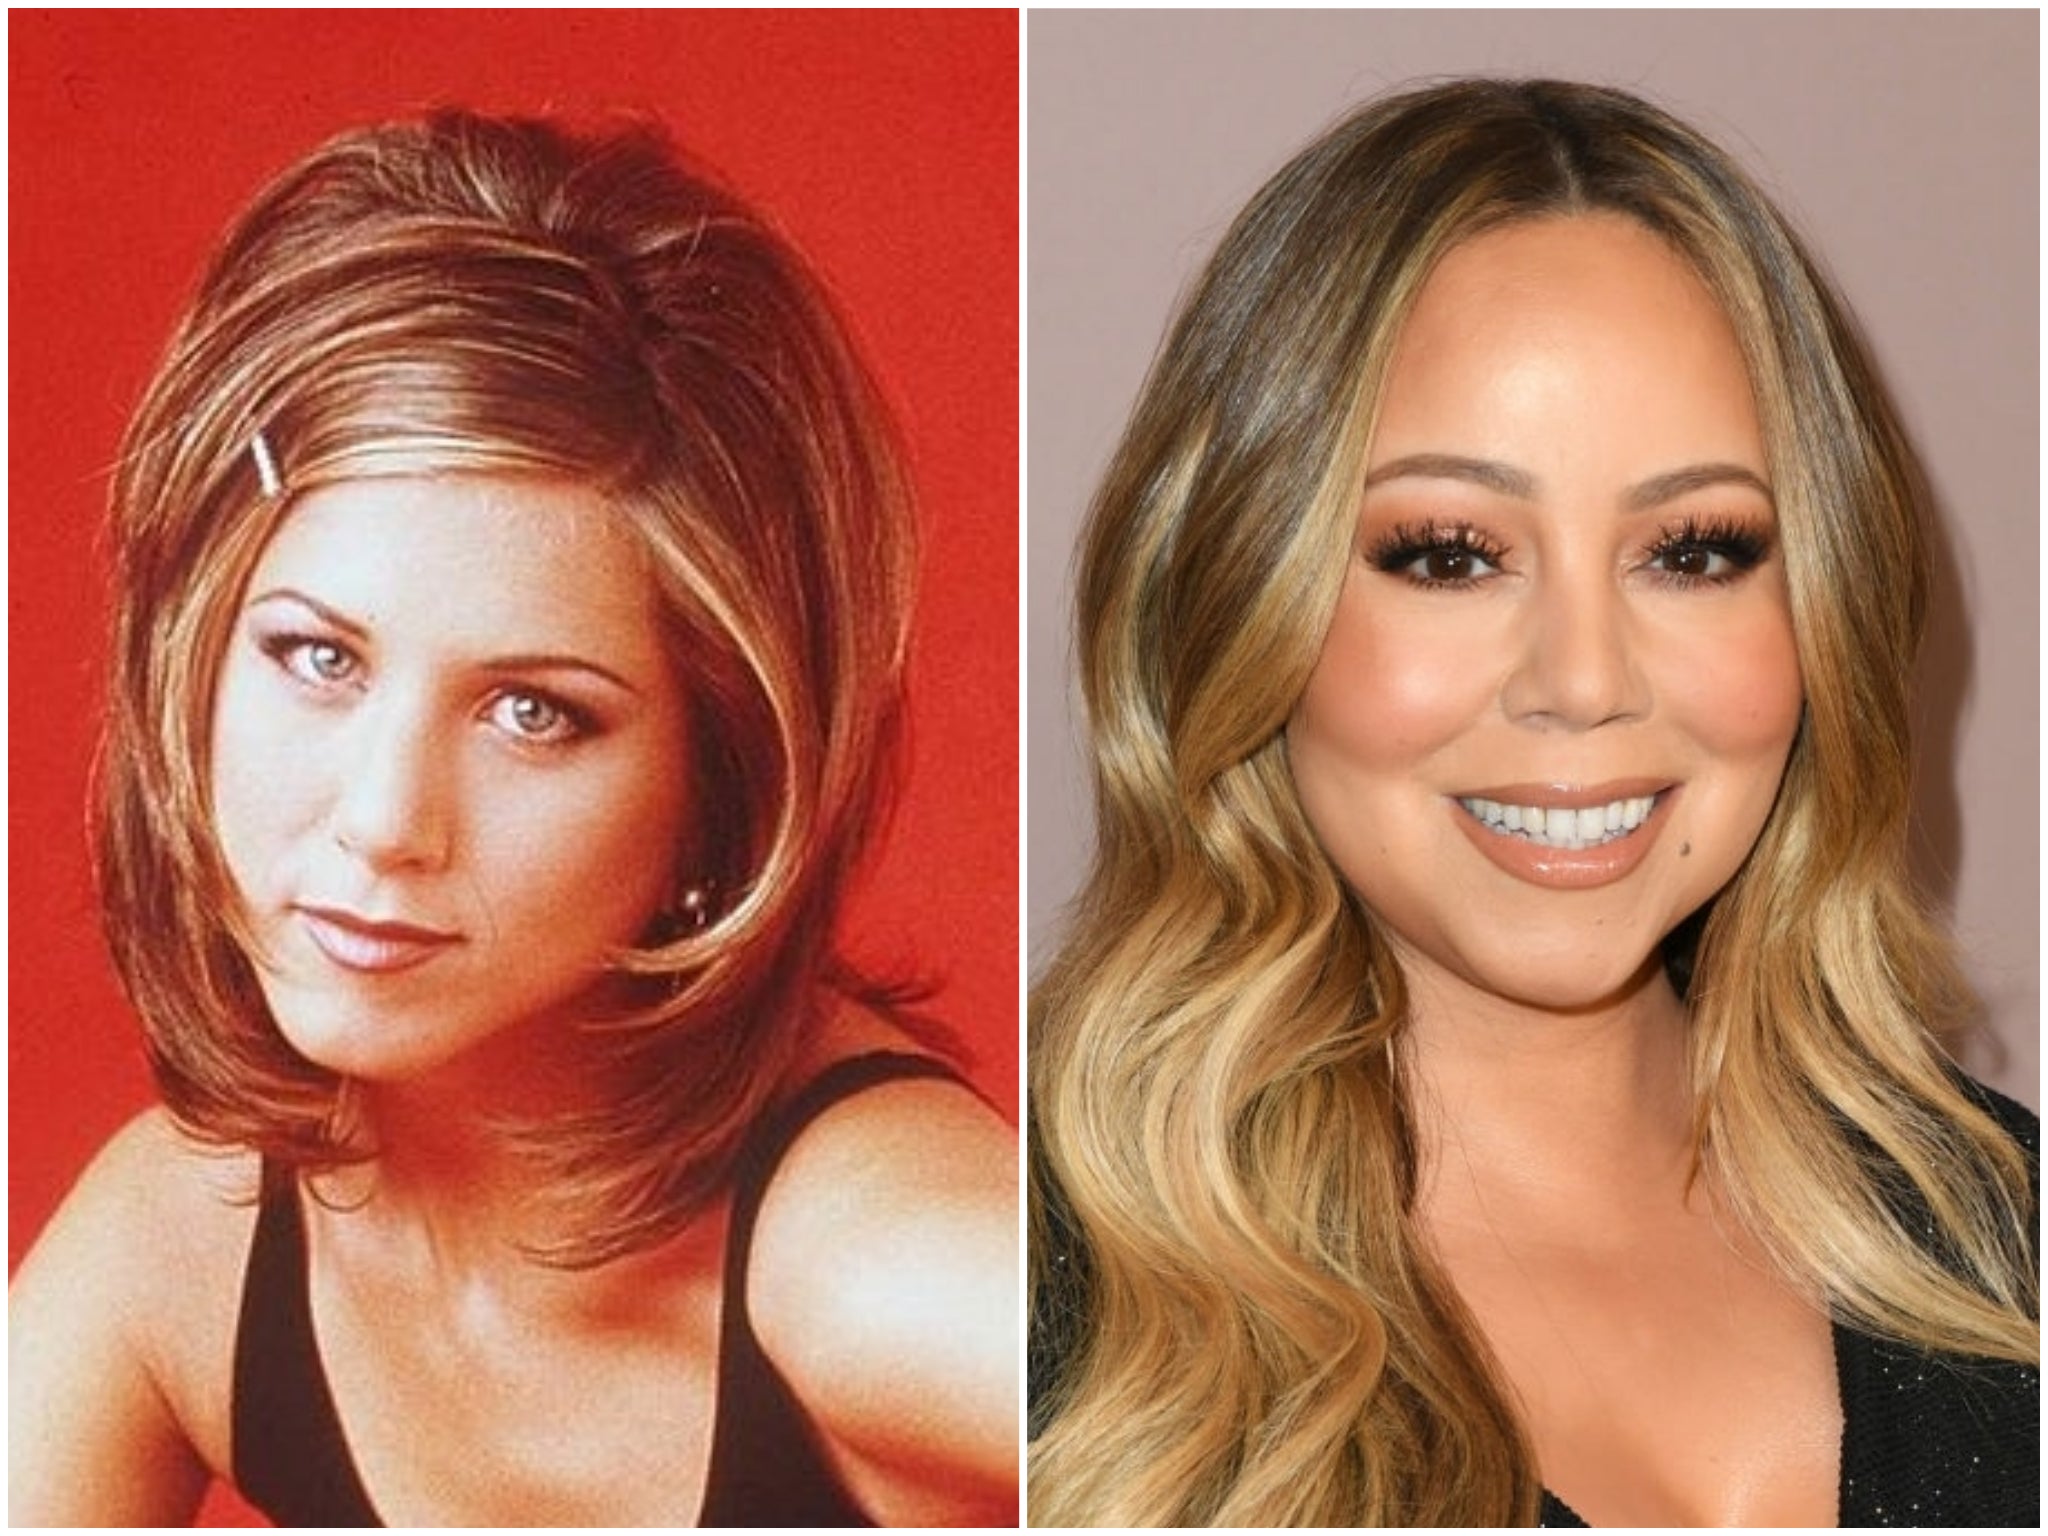 Jennifer Aniston sporting ‘The Rachel’ in Friends, and Mariah Carey in 2019